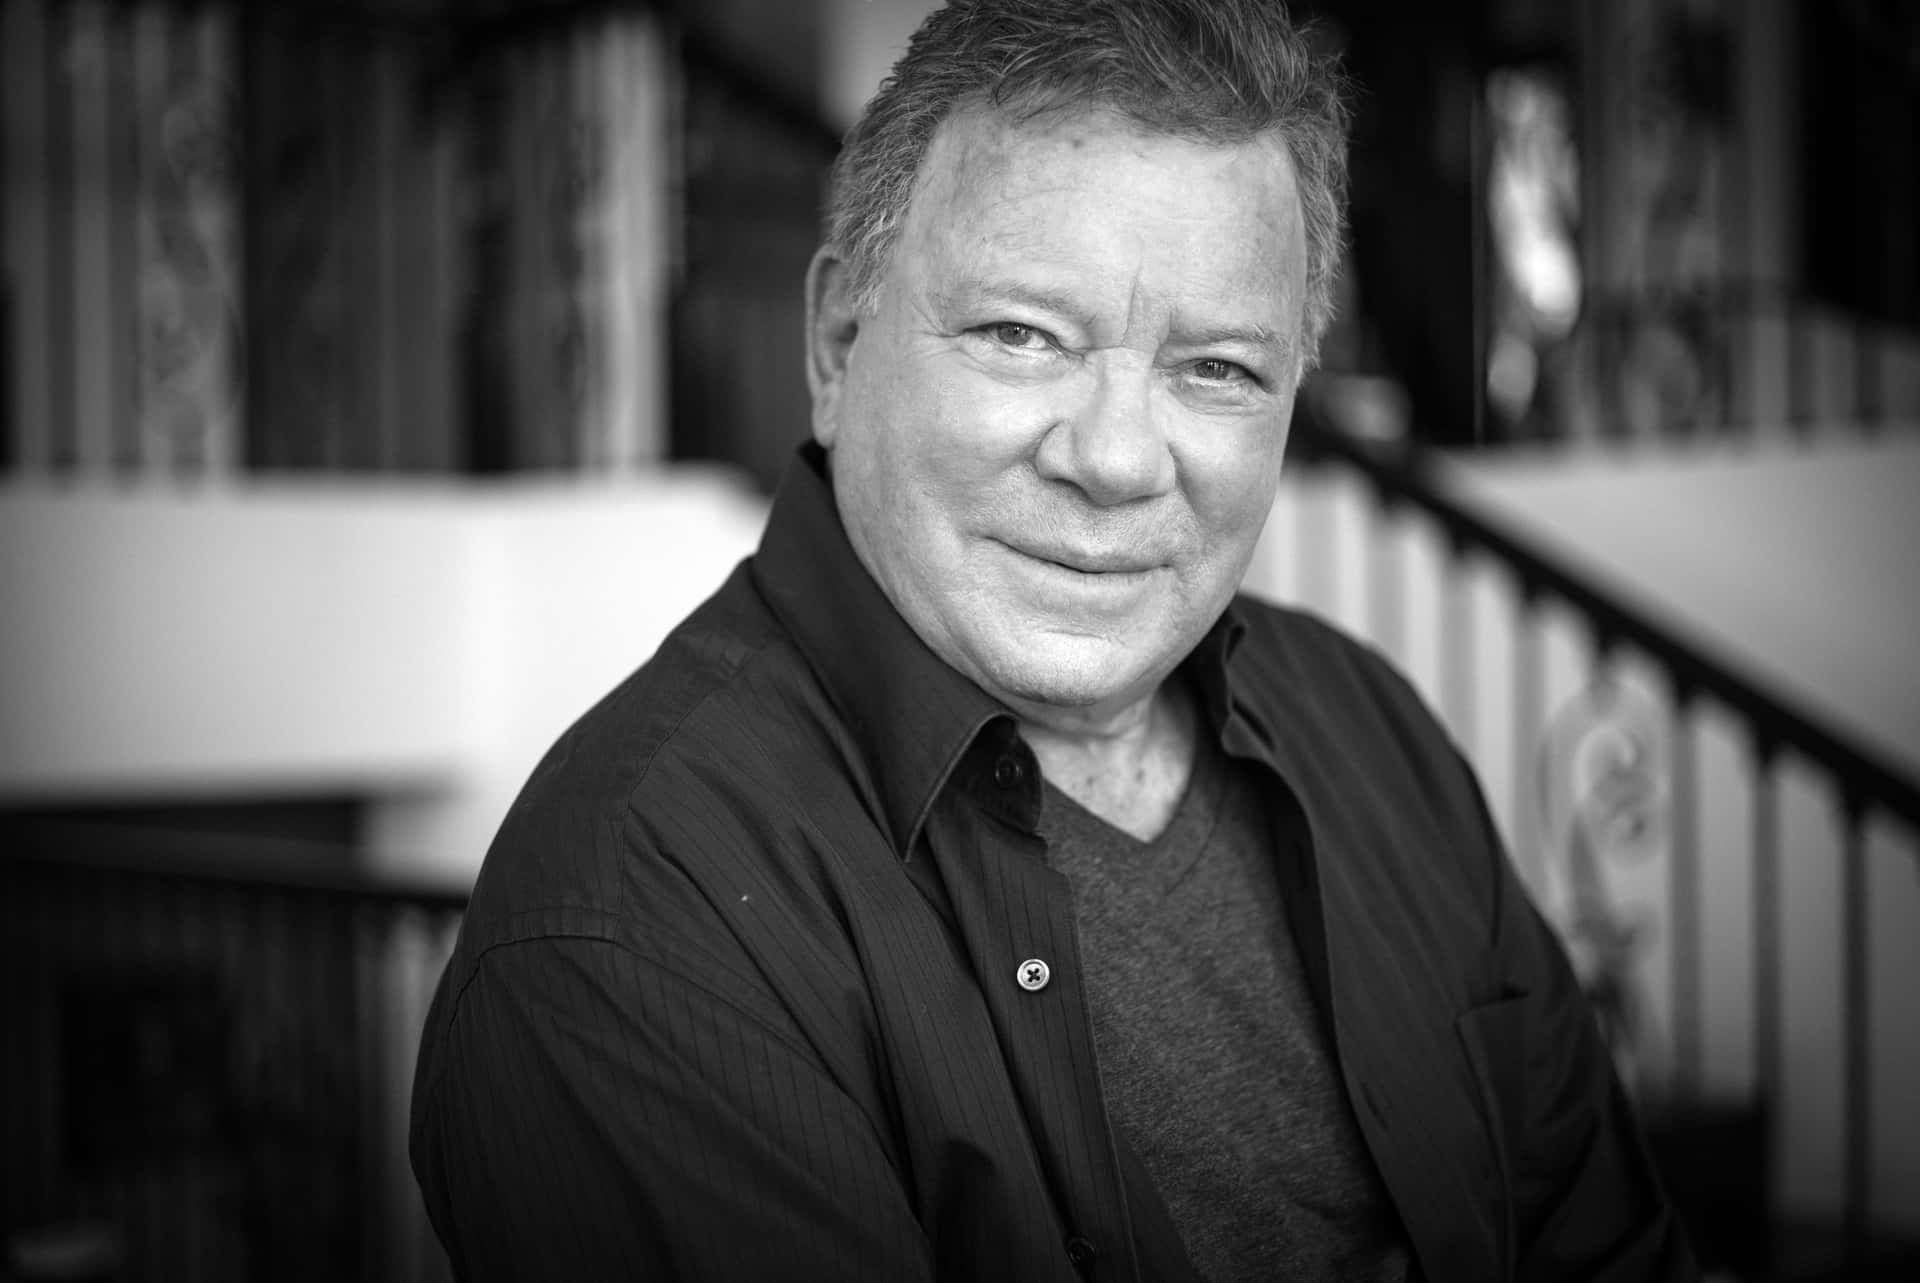 Legendary Hollywood Actor, William Shatner Posing For A Professional Portrait Session. Background